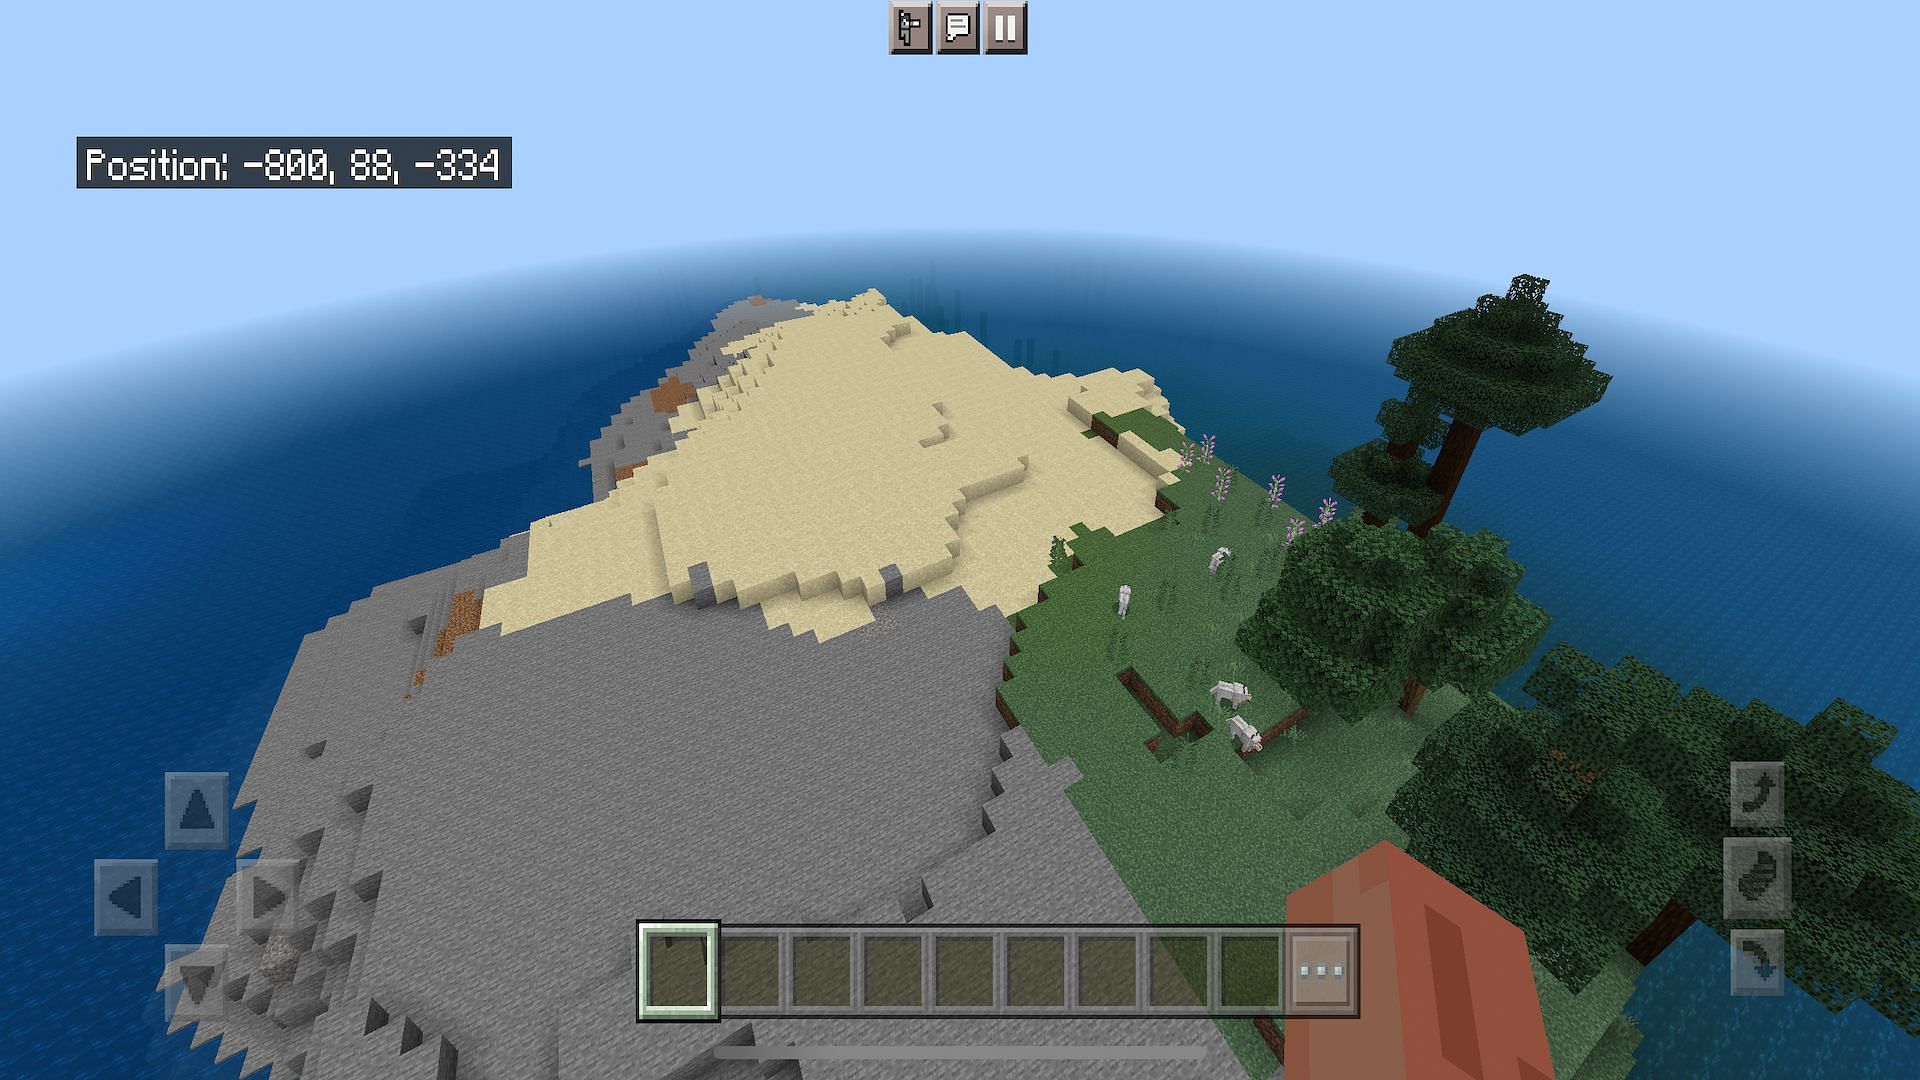 Players can find total peace and isolation on this small island in this secluded seed (Image via Minecraft)